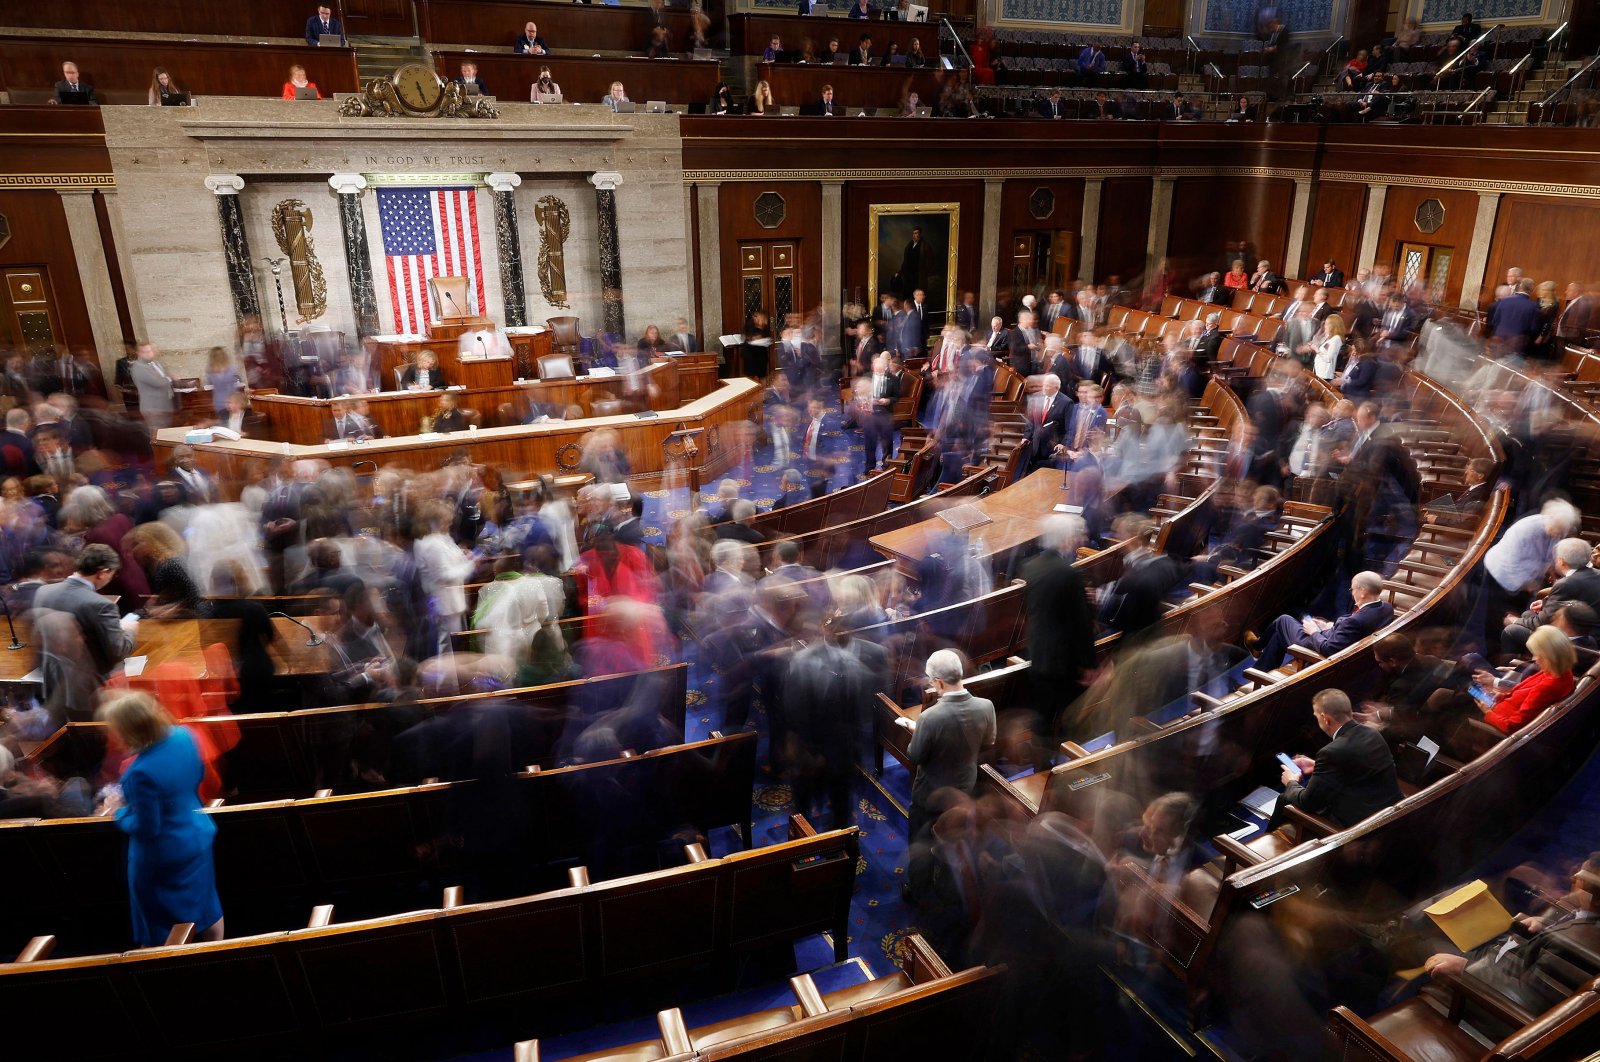 Members-elect of the 118th Congress leave the House Chamber after three ballots failed to elect a new Speaker of the House at the U.S. Capitol Building, Washington, DC, U.S., Jan. 3, 2023. (AFP Photo)